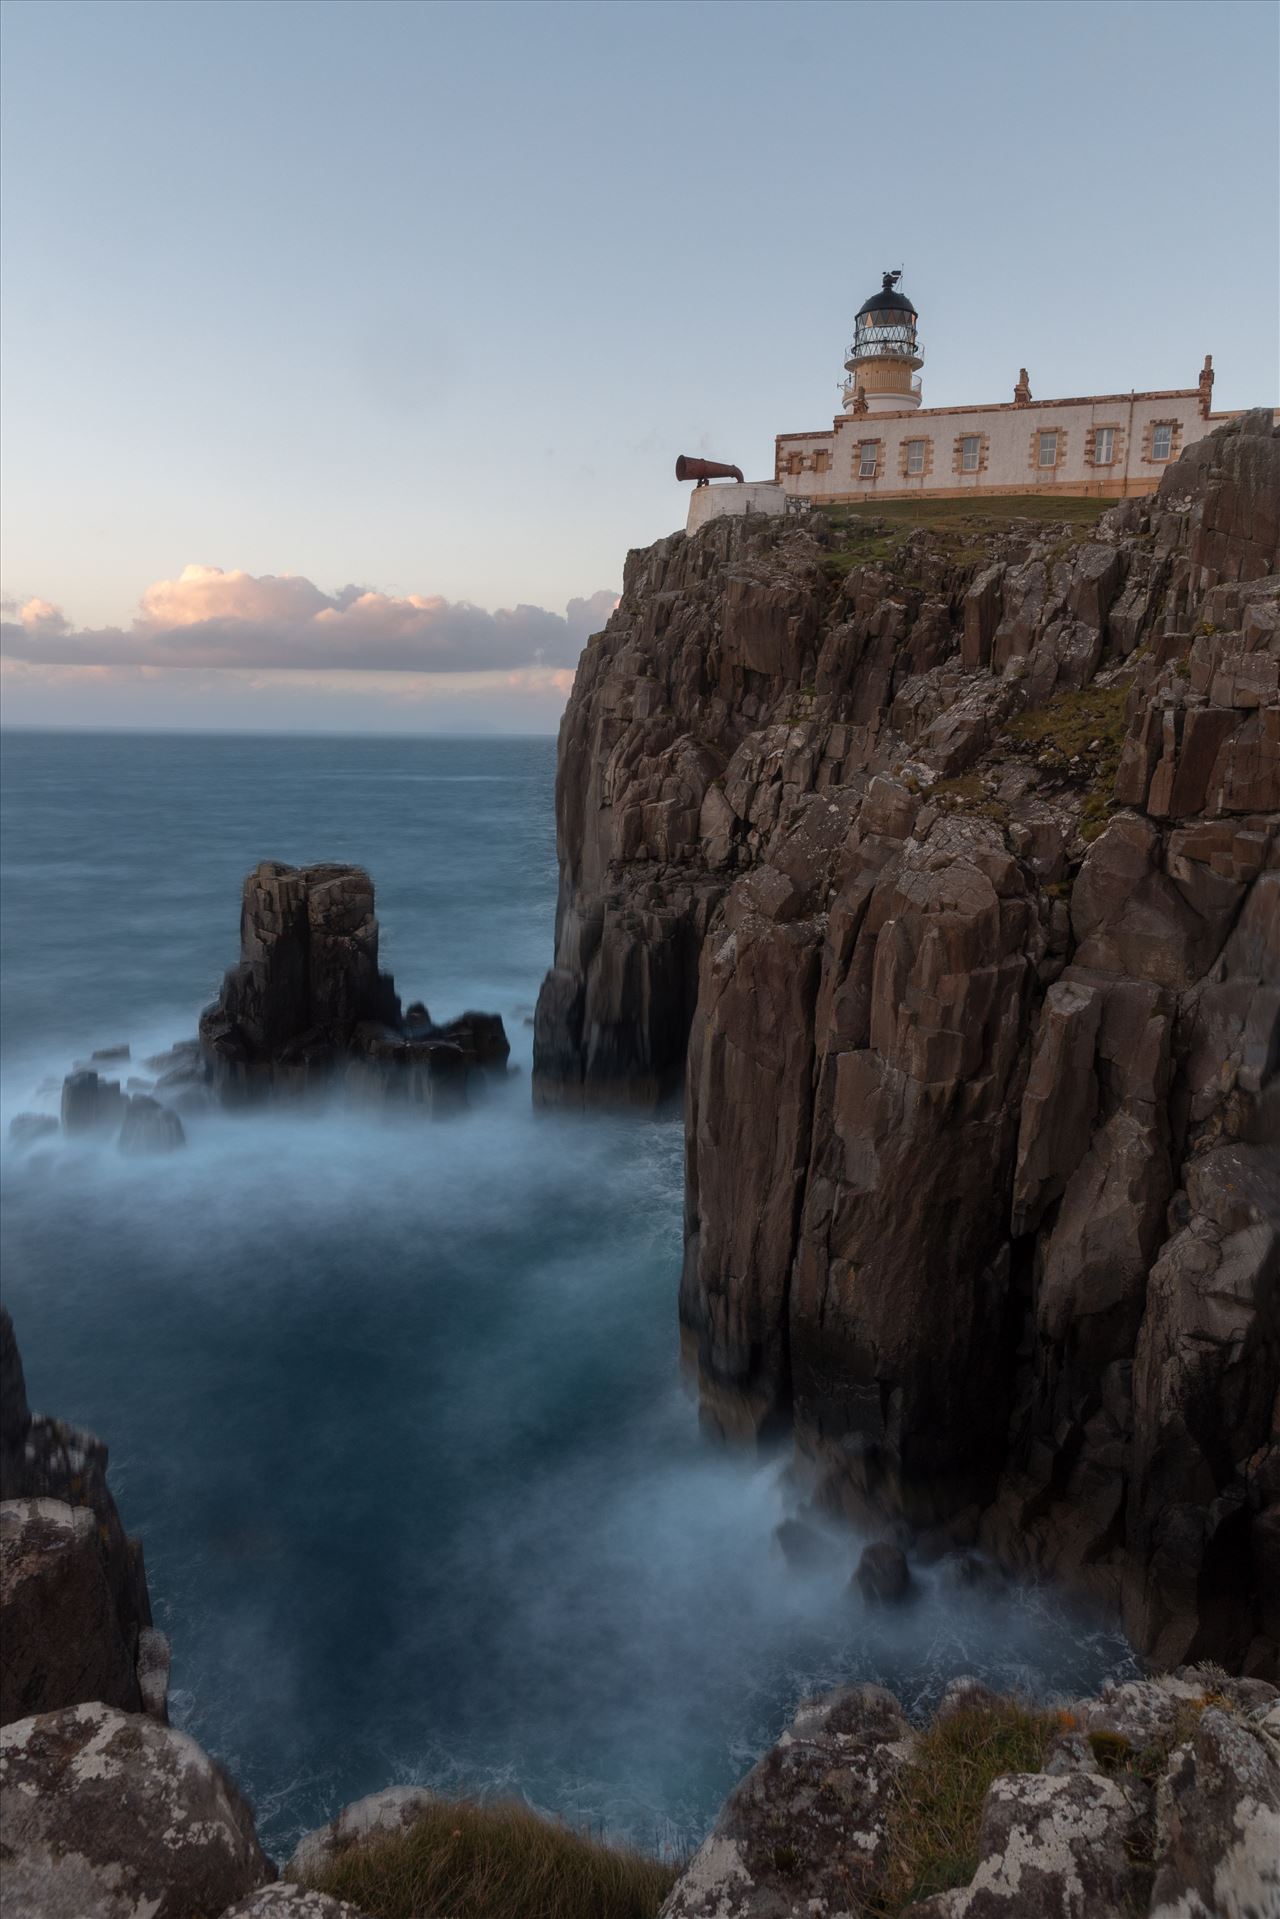 Neist Point lighthouse, Skye - Neist Point is one of the most famous lighthouses in Scotland and can be found on the most westerly tip of Skye near the township of Glendale. by philreay